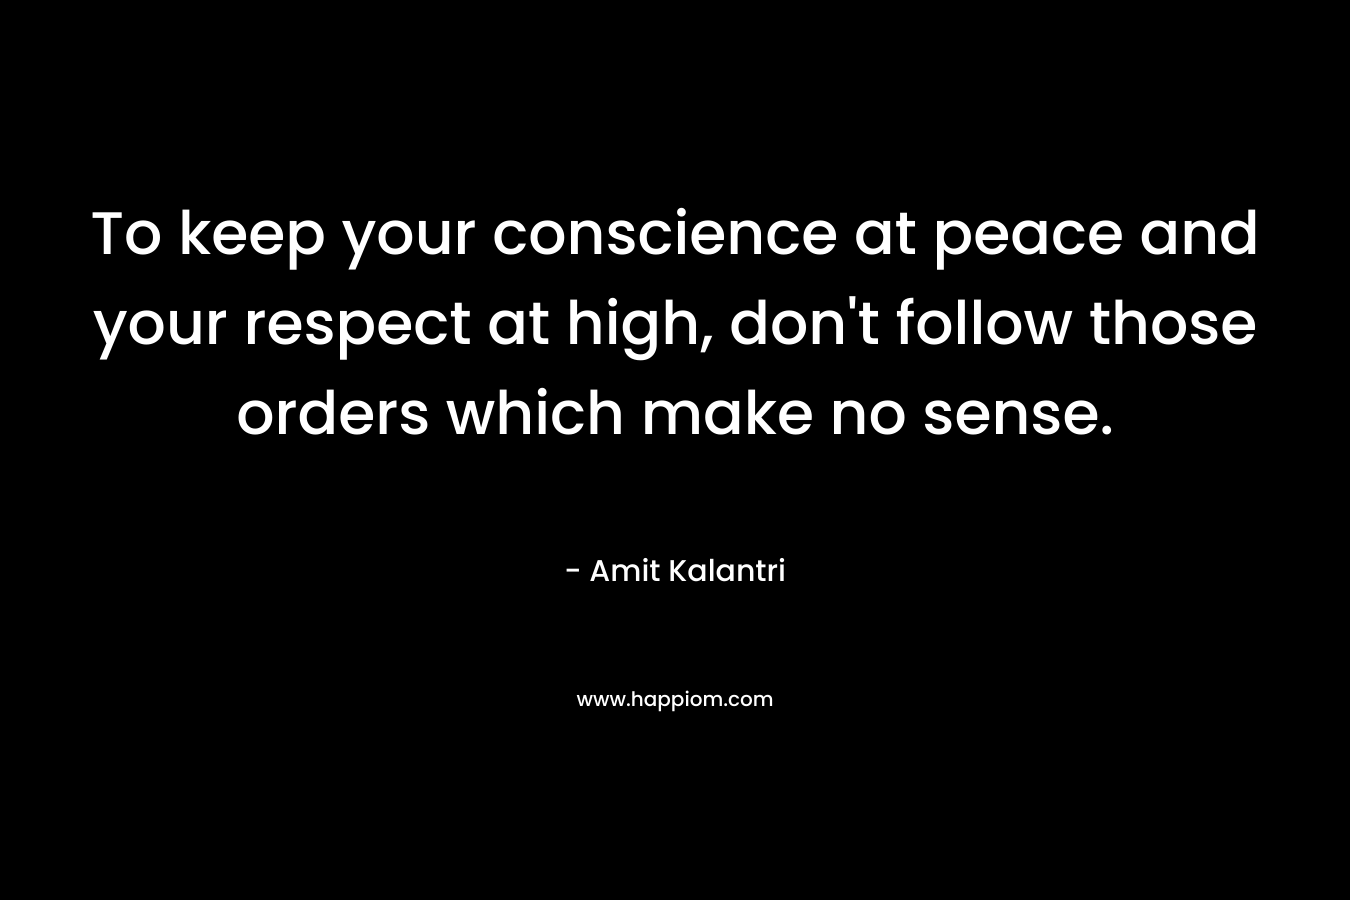 To keep your conscience at peace and your respect at high, don’t follow those orders which make no sense. – Amit Kalantri